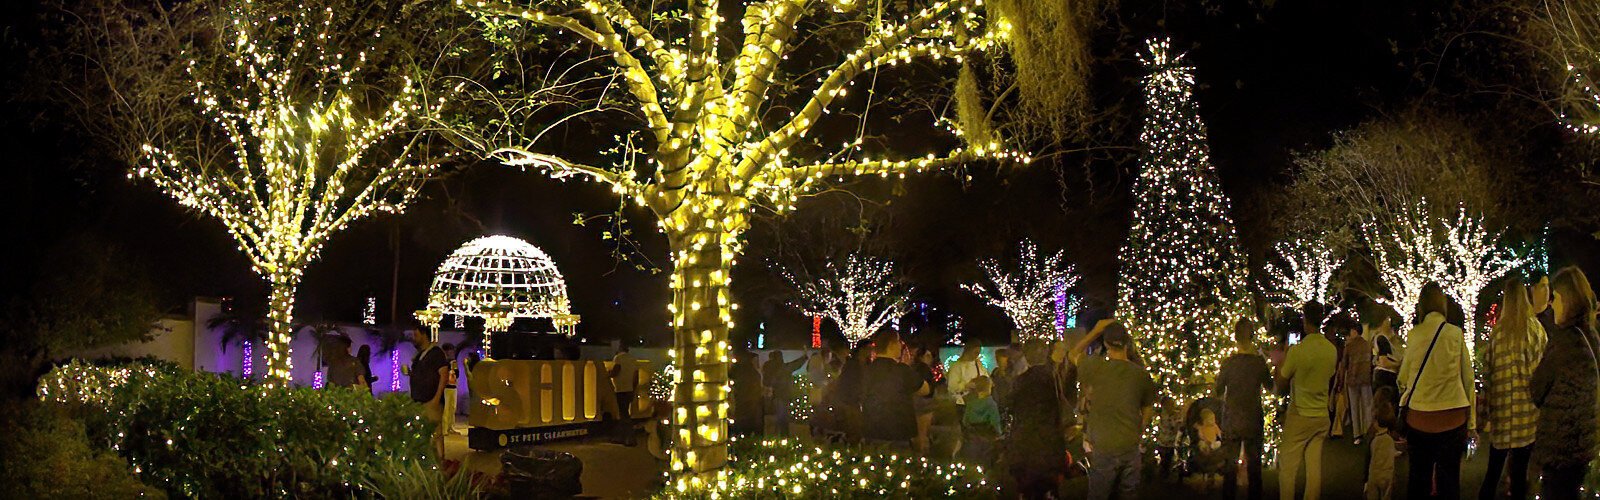  Holiday Lights in the Gardens welcomes evening visitors to the Florida Botanical Gardens in Largo through December 31st.